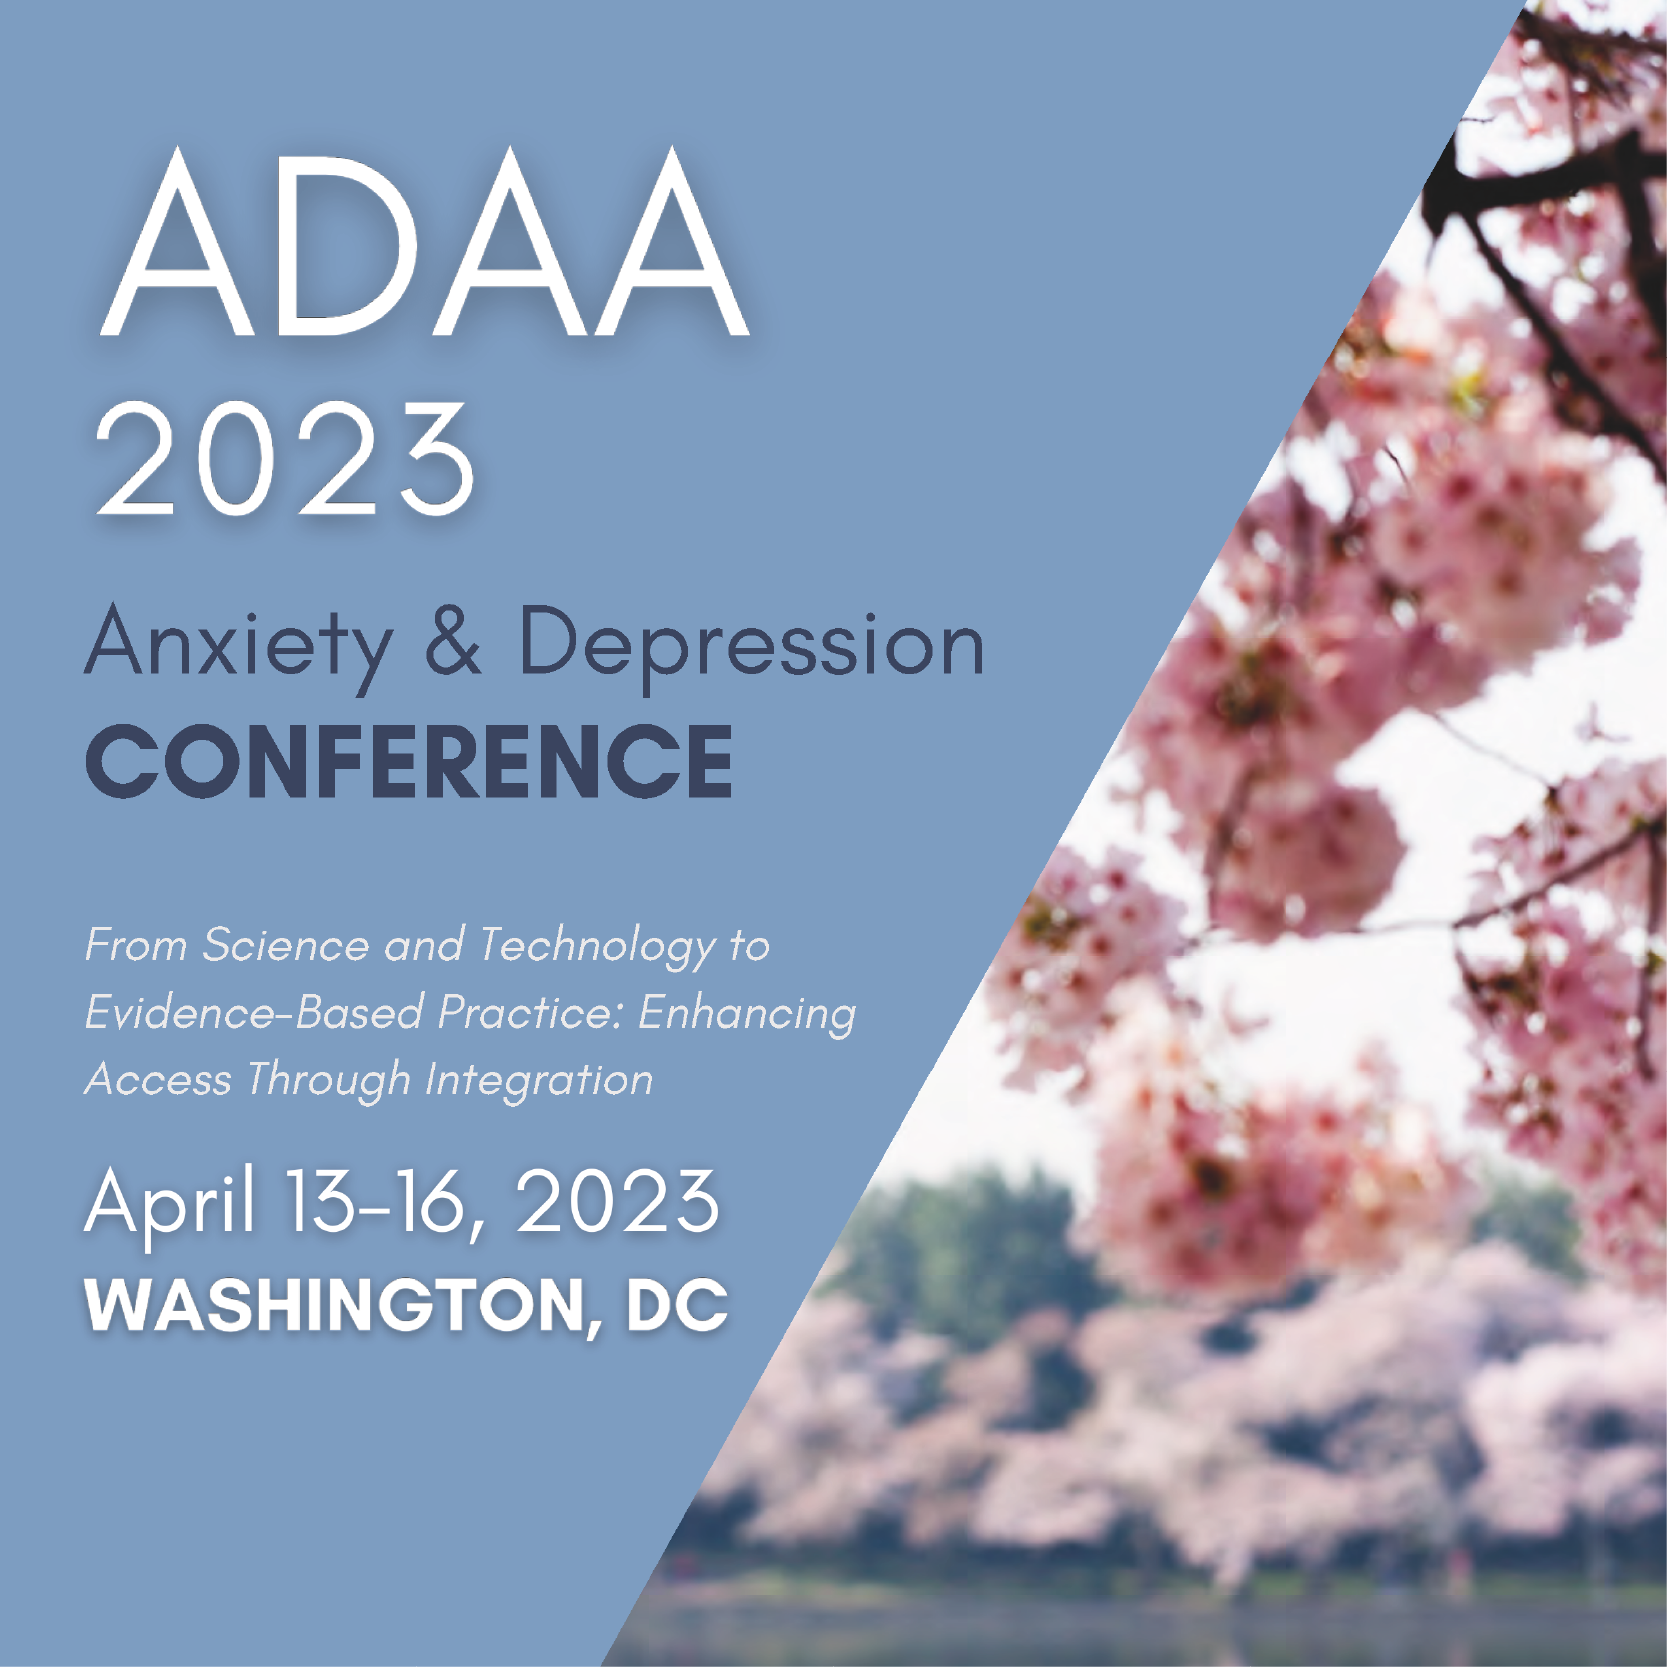 Anxiety And Depression Conference - ADAA 2023